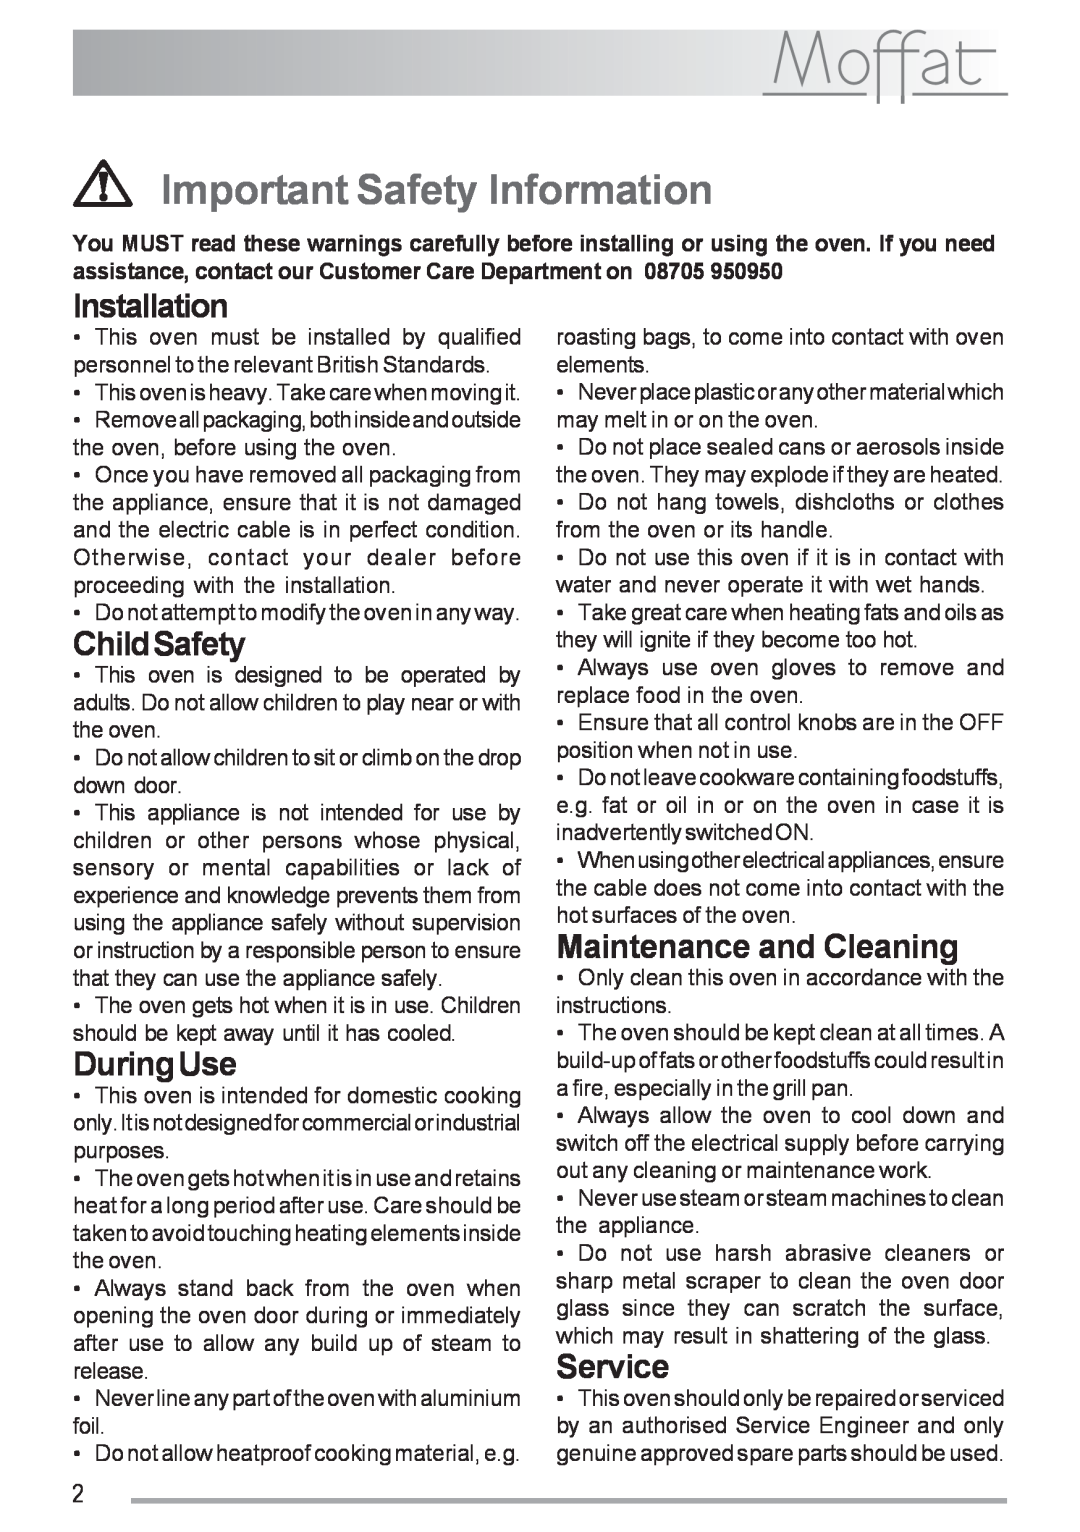 Moffat MSS 601 manual Important Safety Information, Installation, ChildSafety, DuringUse, Maintenance and Cleaning, Service 